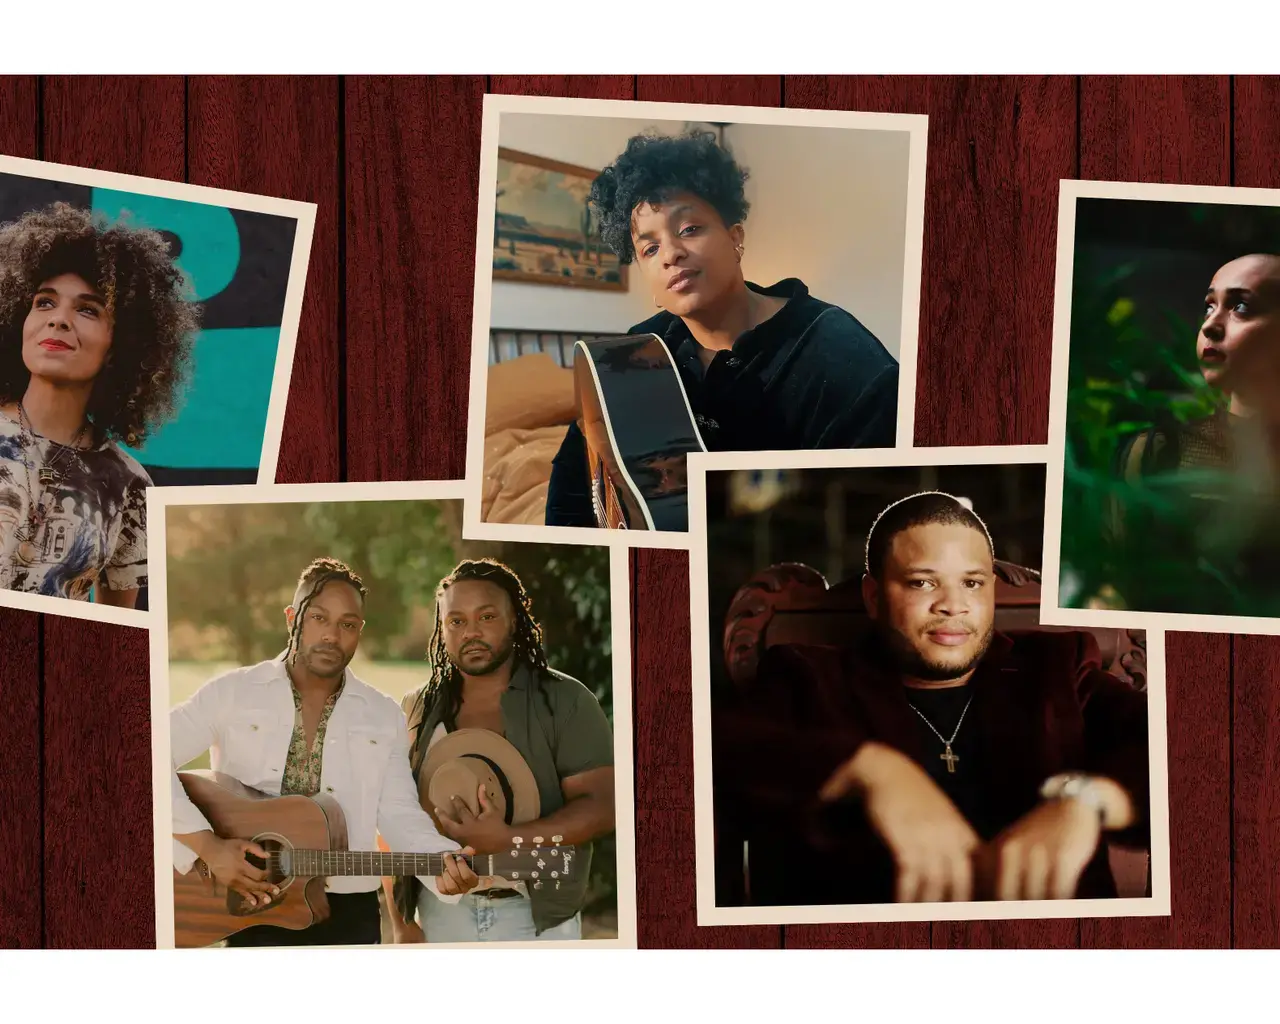 Black Opry Residency artists. From left to right:&nbsp;Samantha Rise;&nbsp;The Kentucky Gentlemen, photo by Laura Moll;&nbsp;Denitia, photo by Noelle Fries;&nbsp;Tylar Bryant; Grace Givertz, photo by Omari Spears.